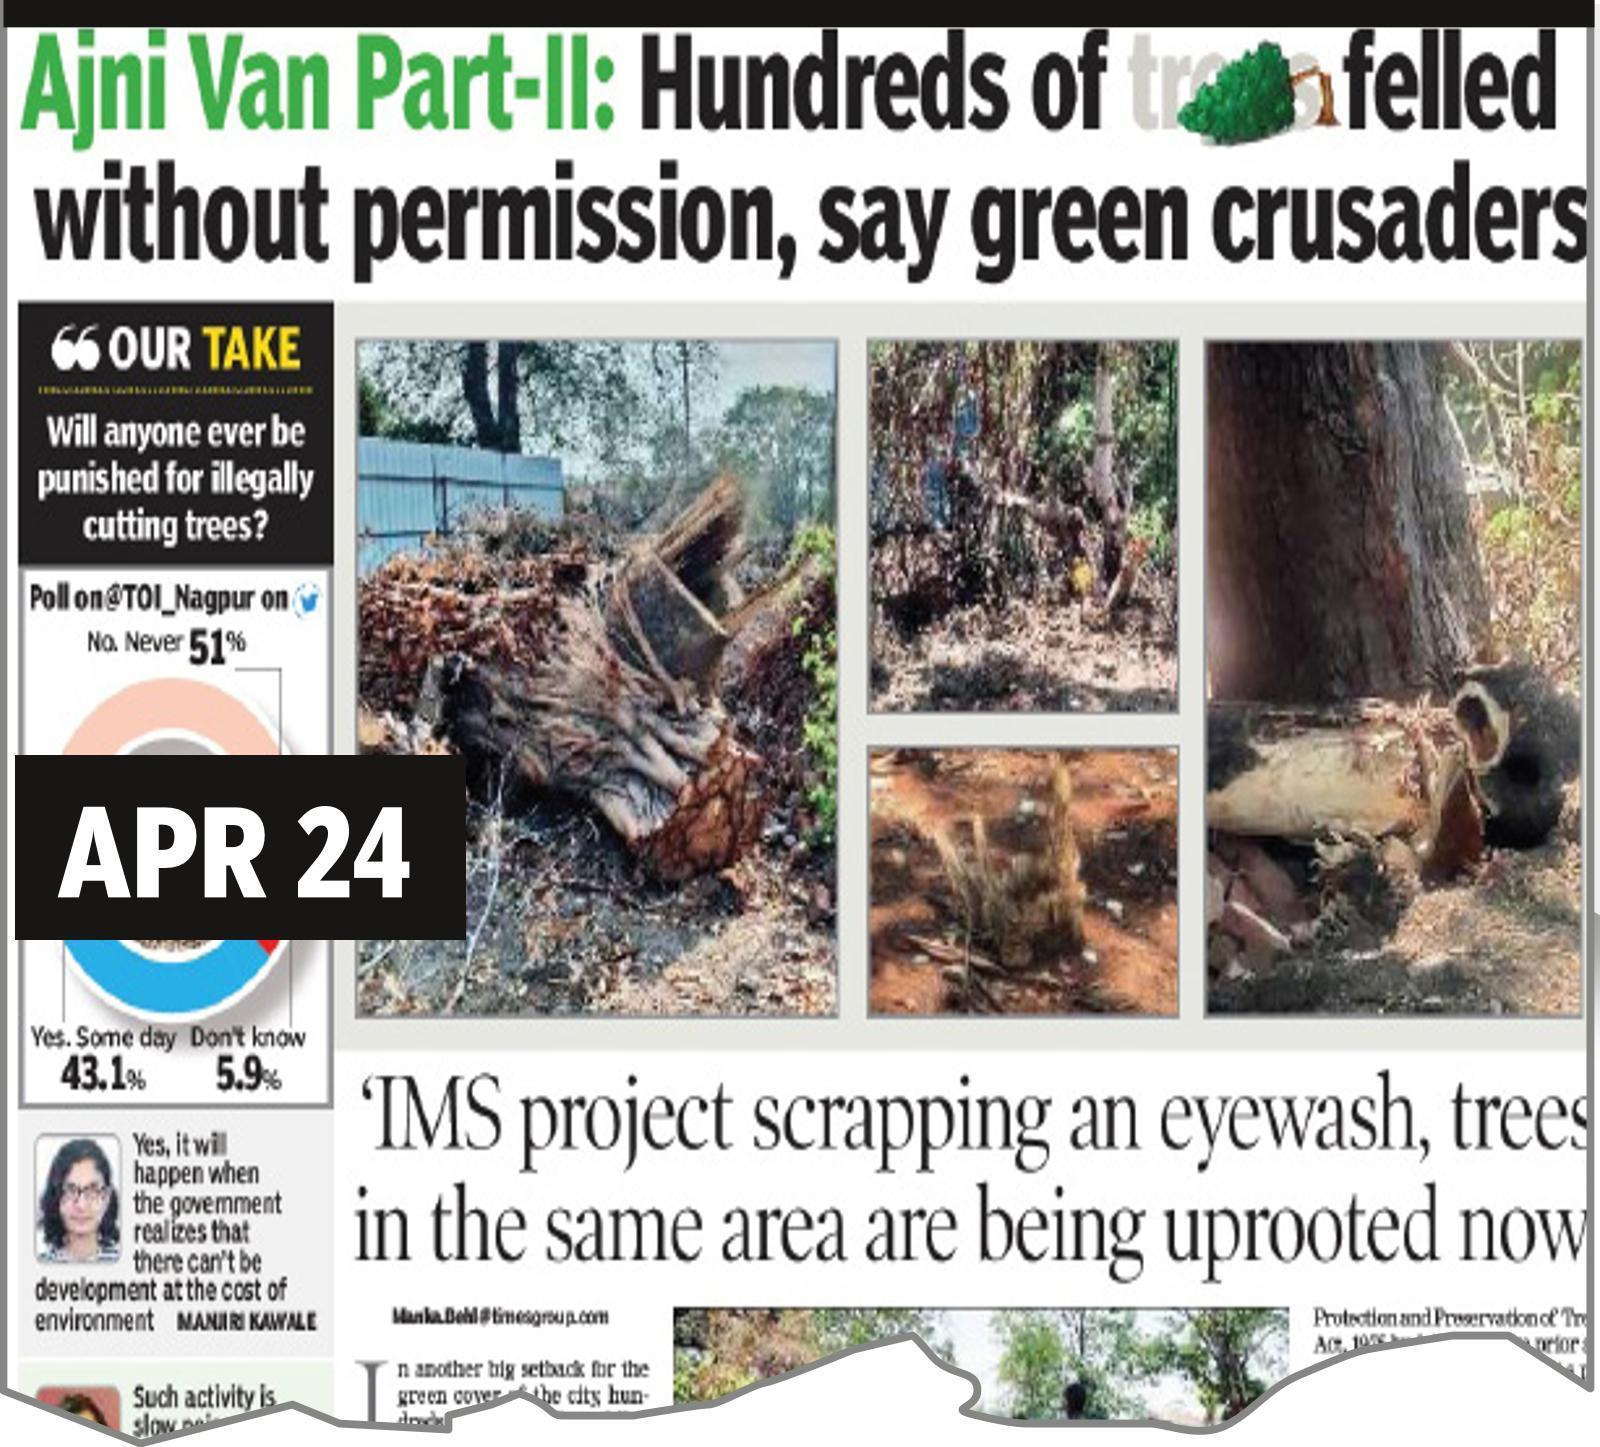 HC extends stay on tree felling at Ajni Van, asks govt to reply why cops haven’t filed FIR